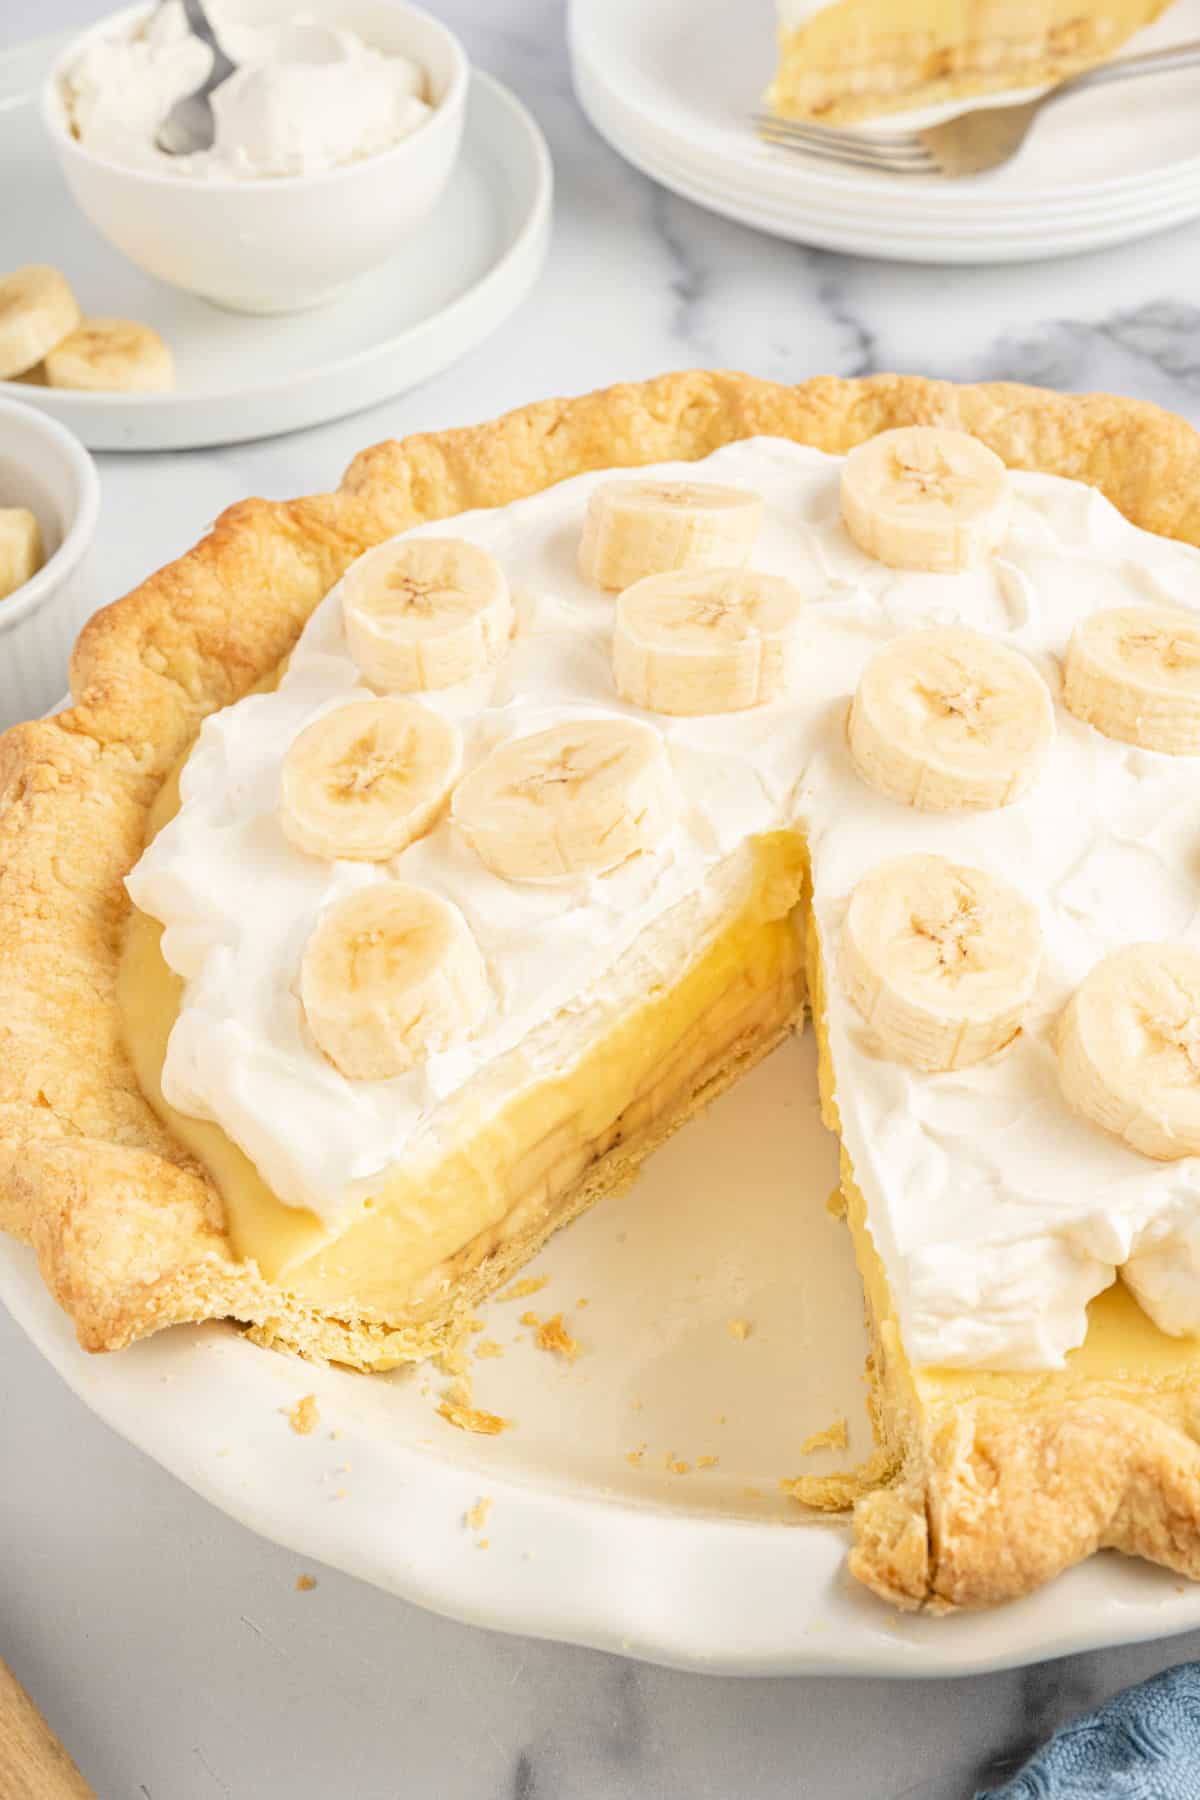 Banana cream pie with a slice removed.